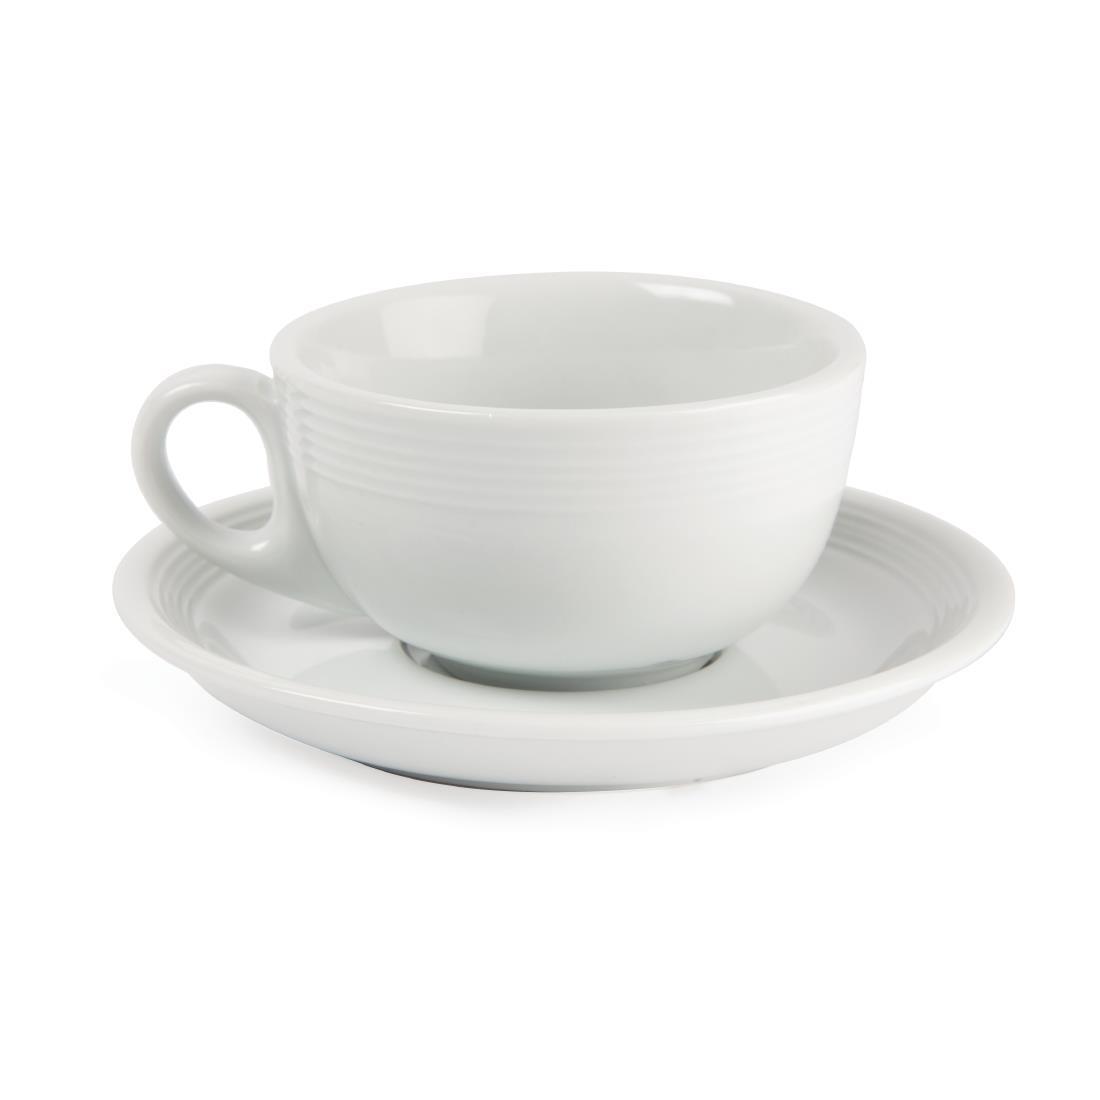 Olympia Linear Cappuccino Cups 206ml (Pack of 12) - U086  - 4